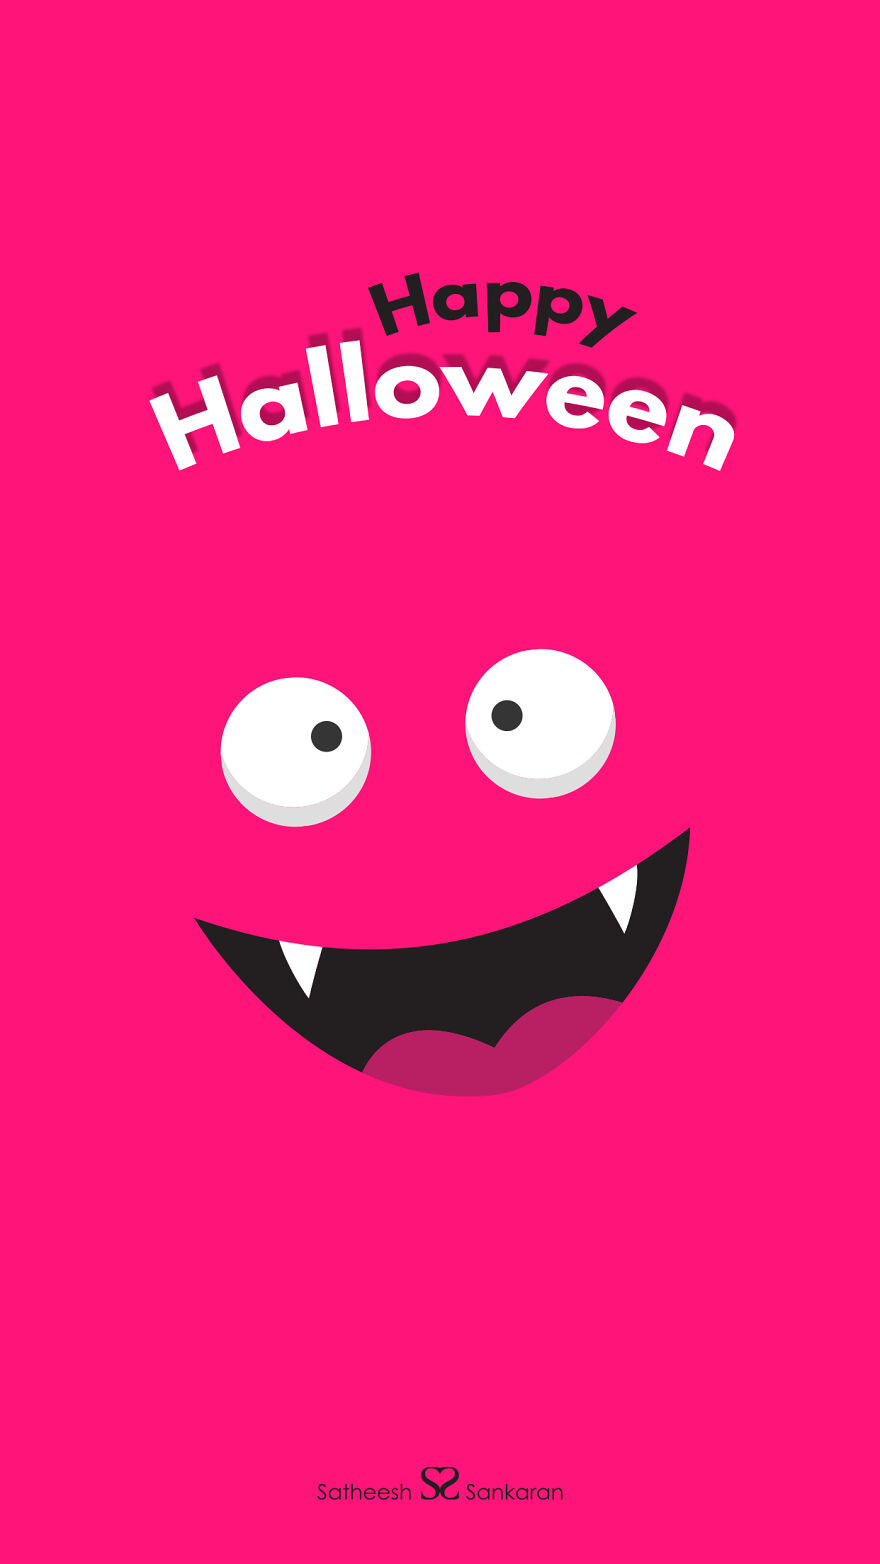 A Colorful Cute List Of Monster Themed Wallpapers For Halloween